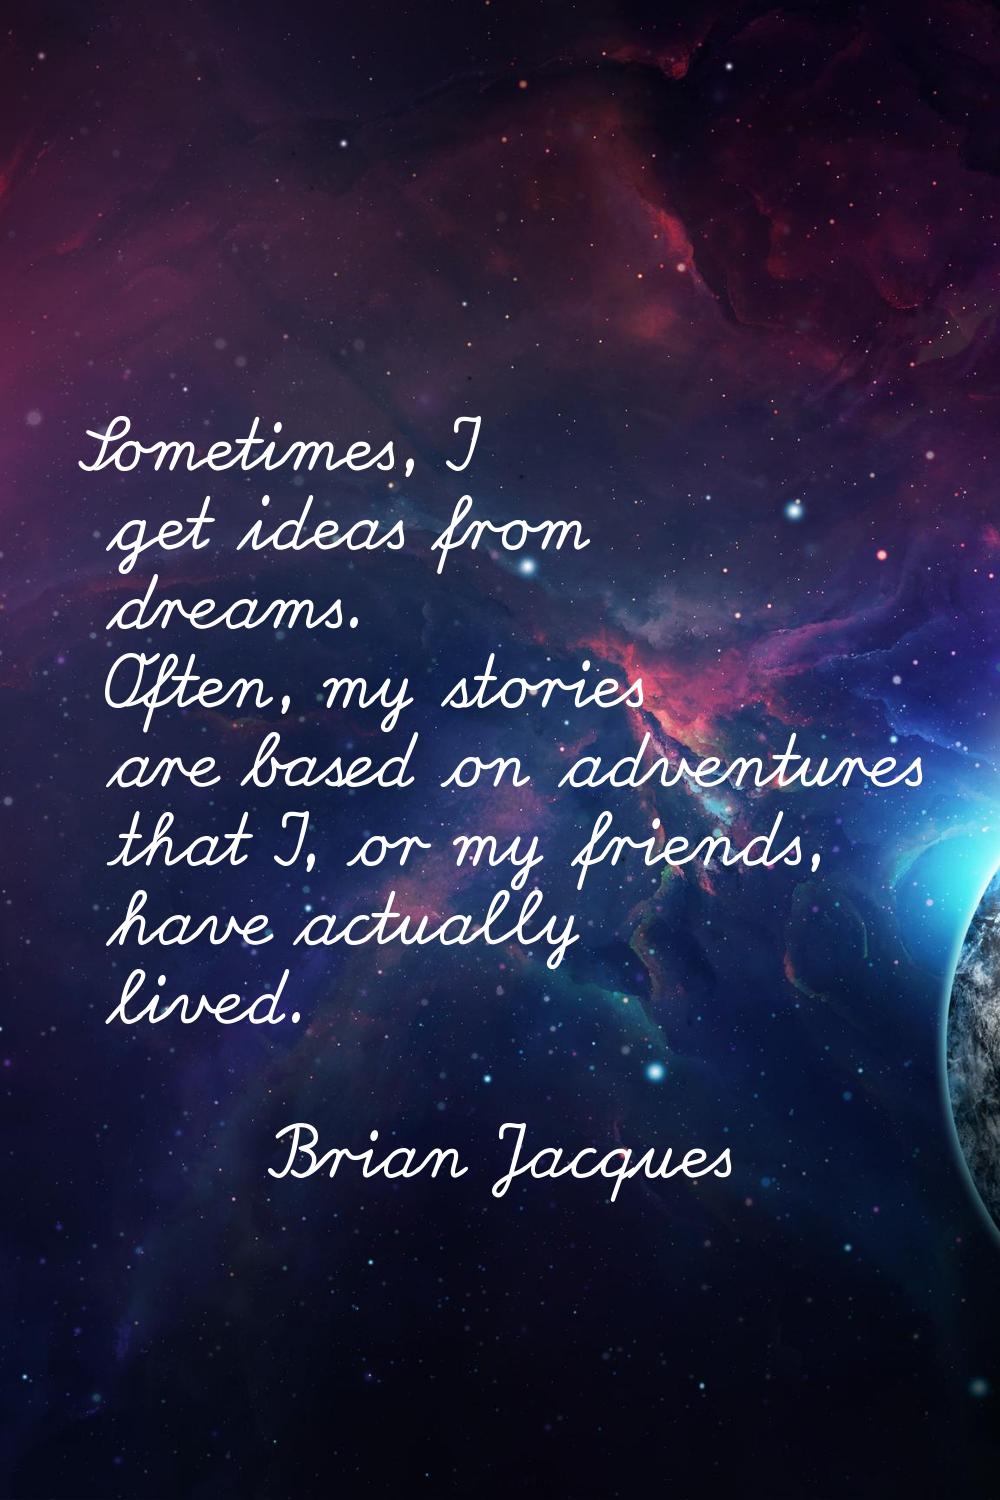 Sometimes, I get ideas from dreams. Often, my stories are based on adventures that I, or my friends